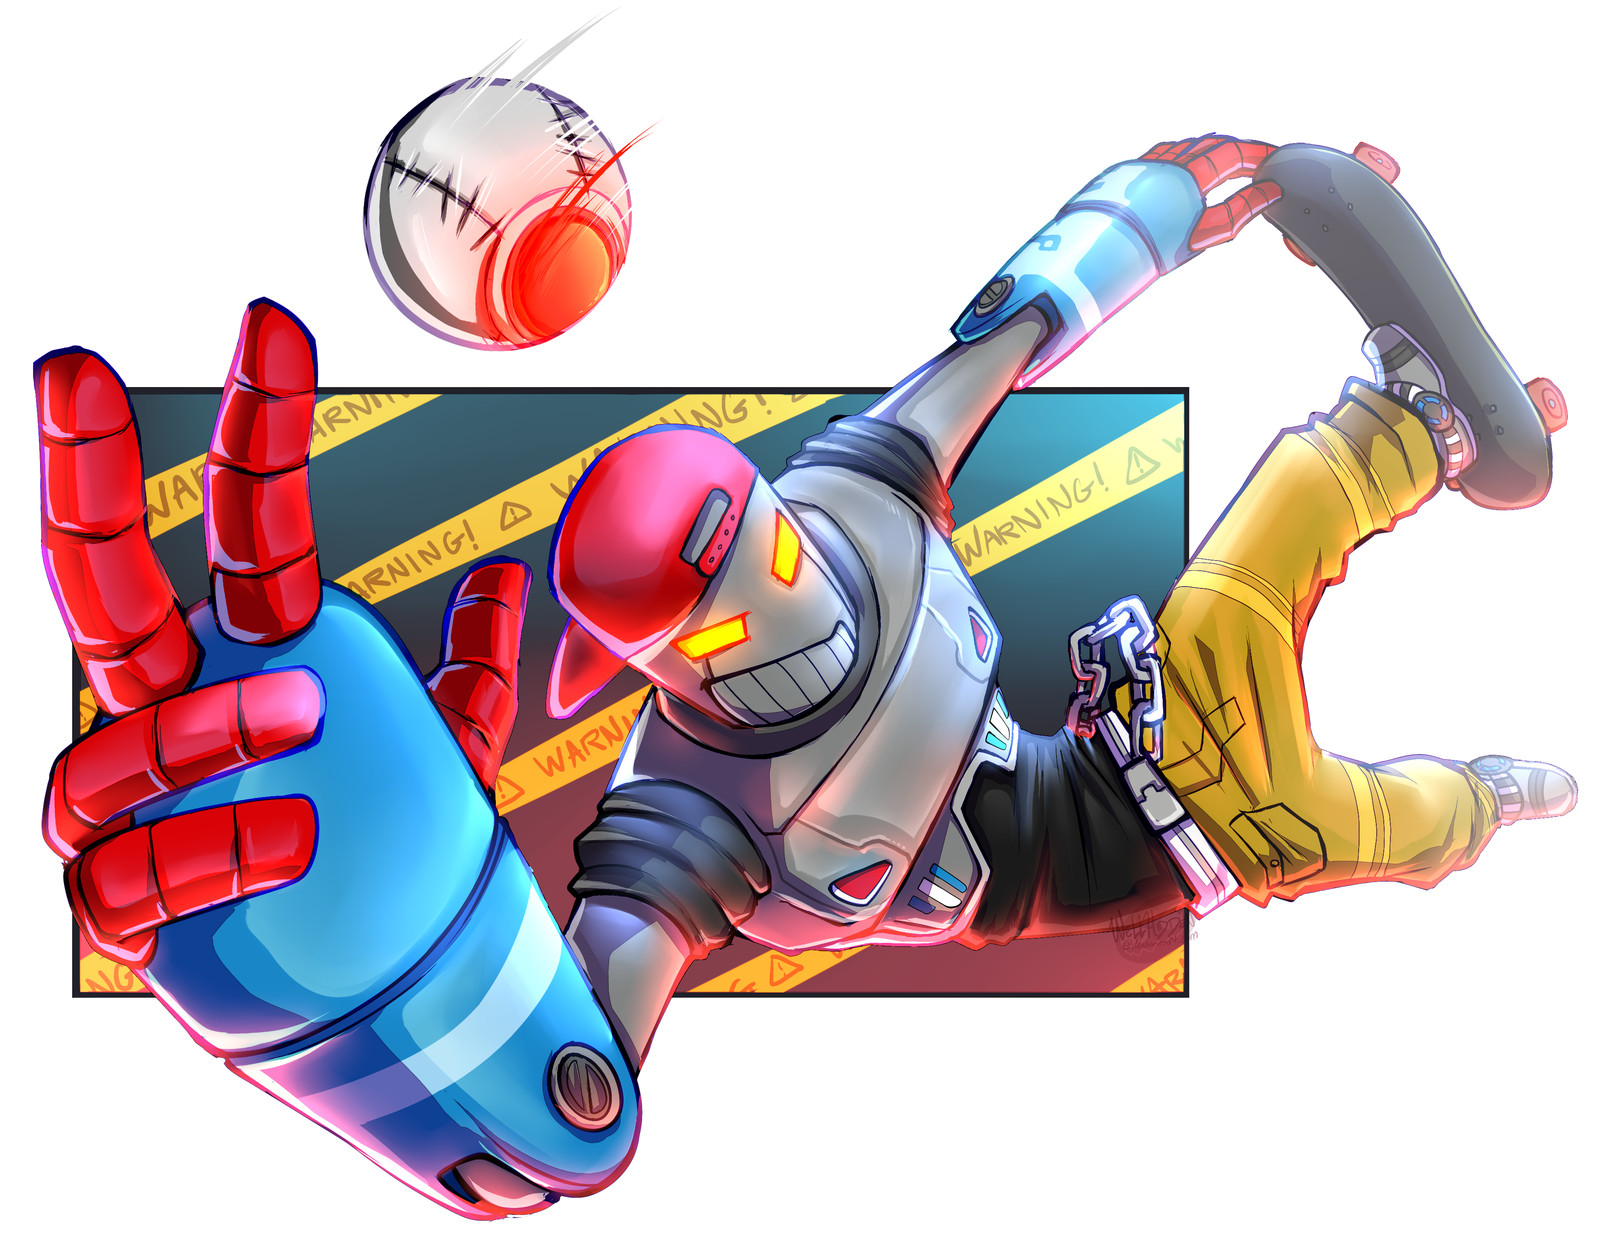 Birthday gift // Lethal League Switch